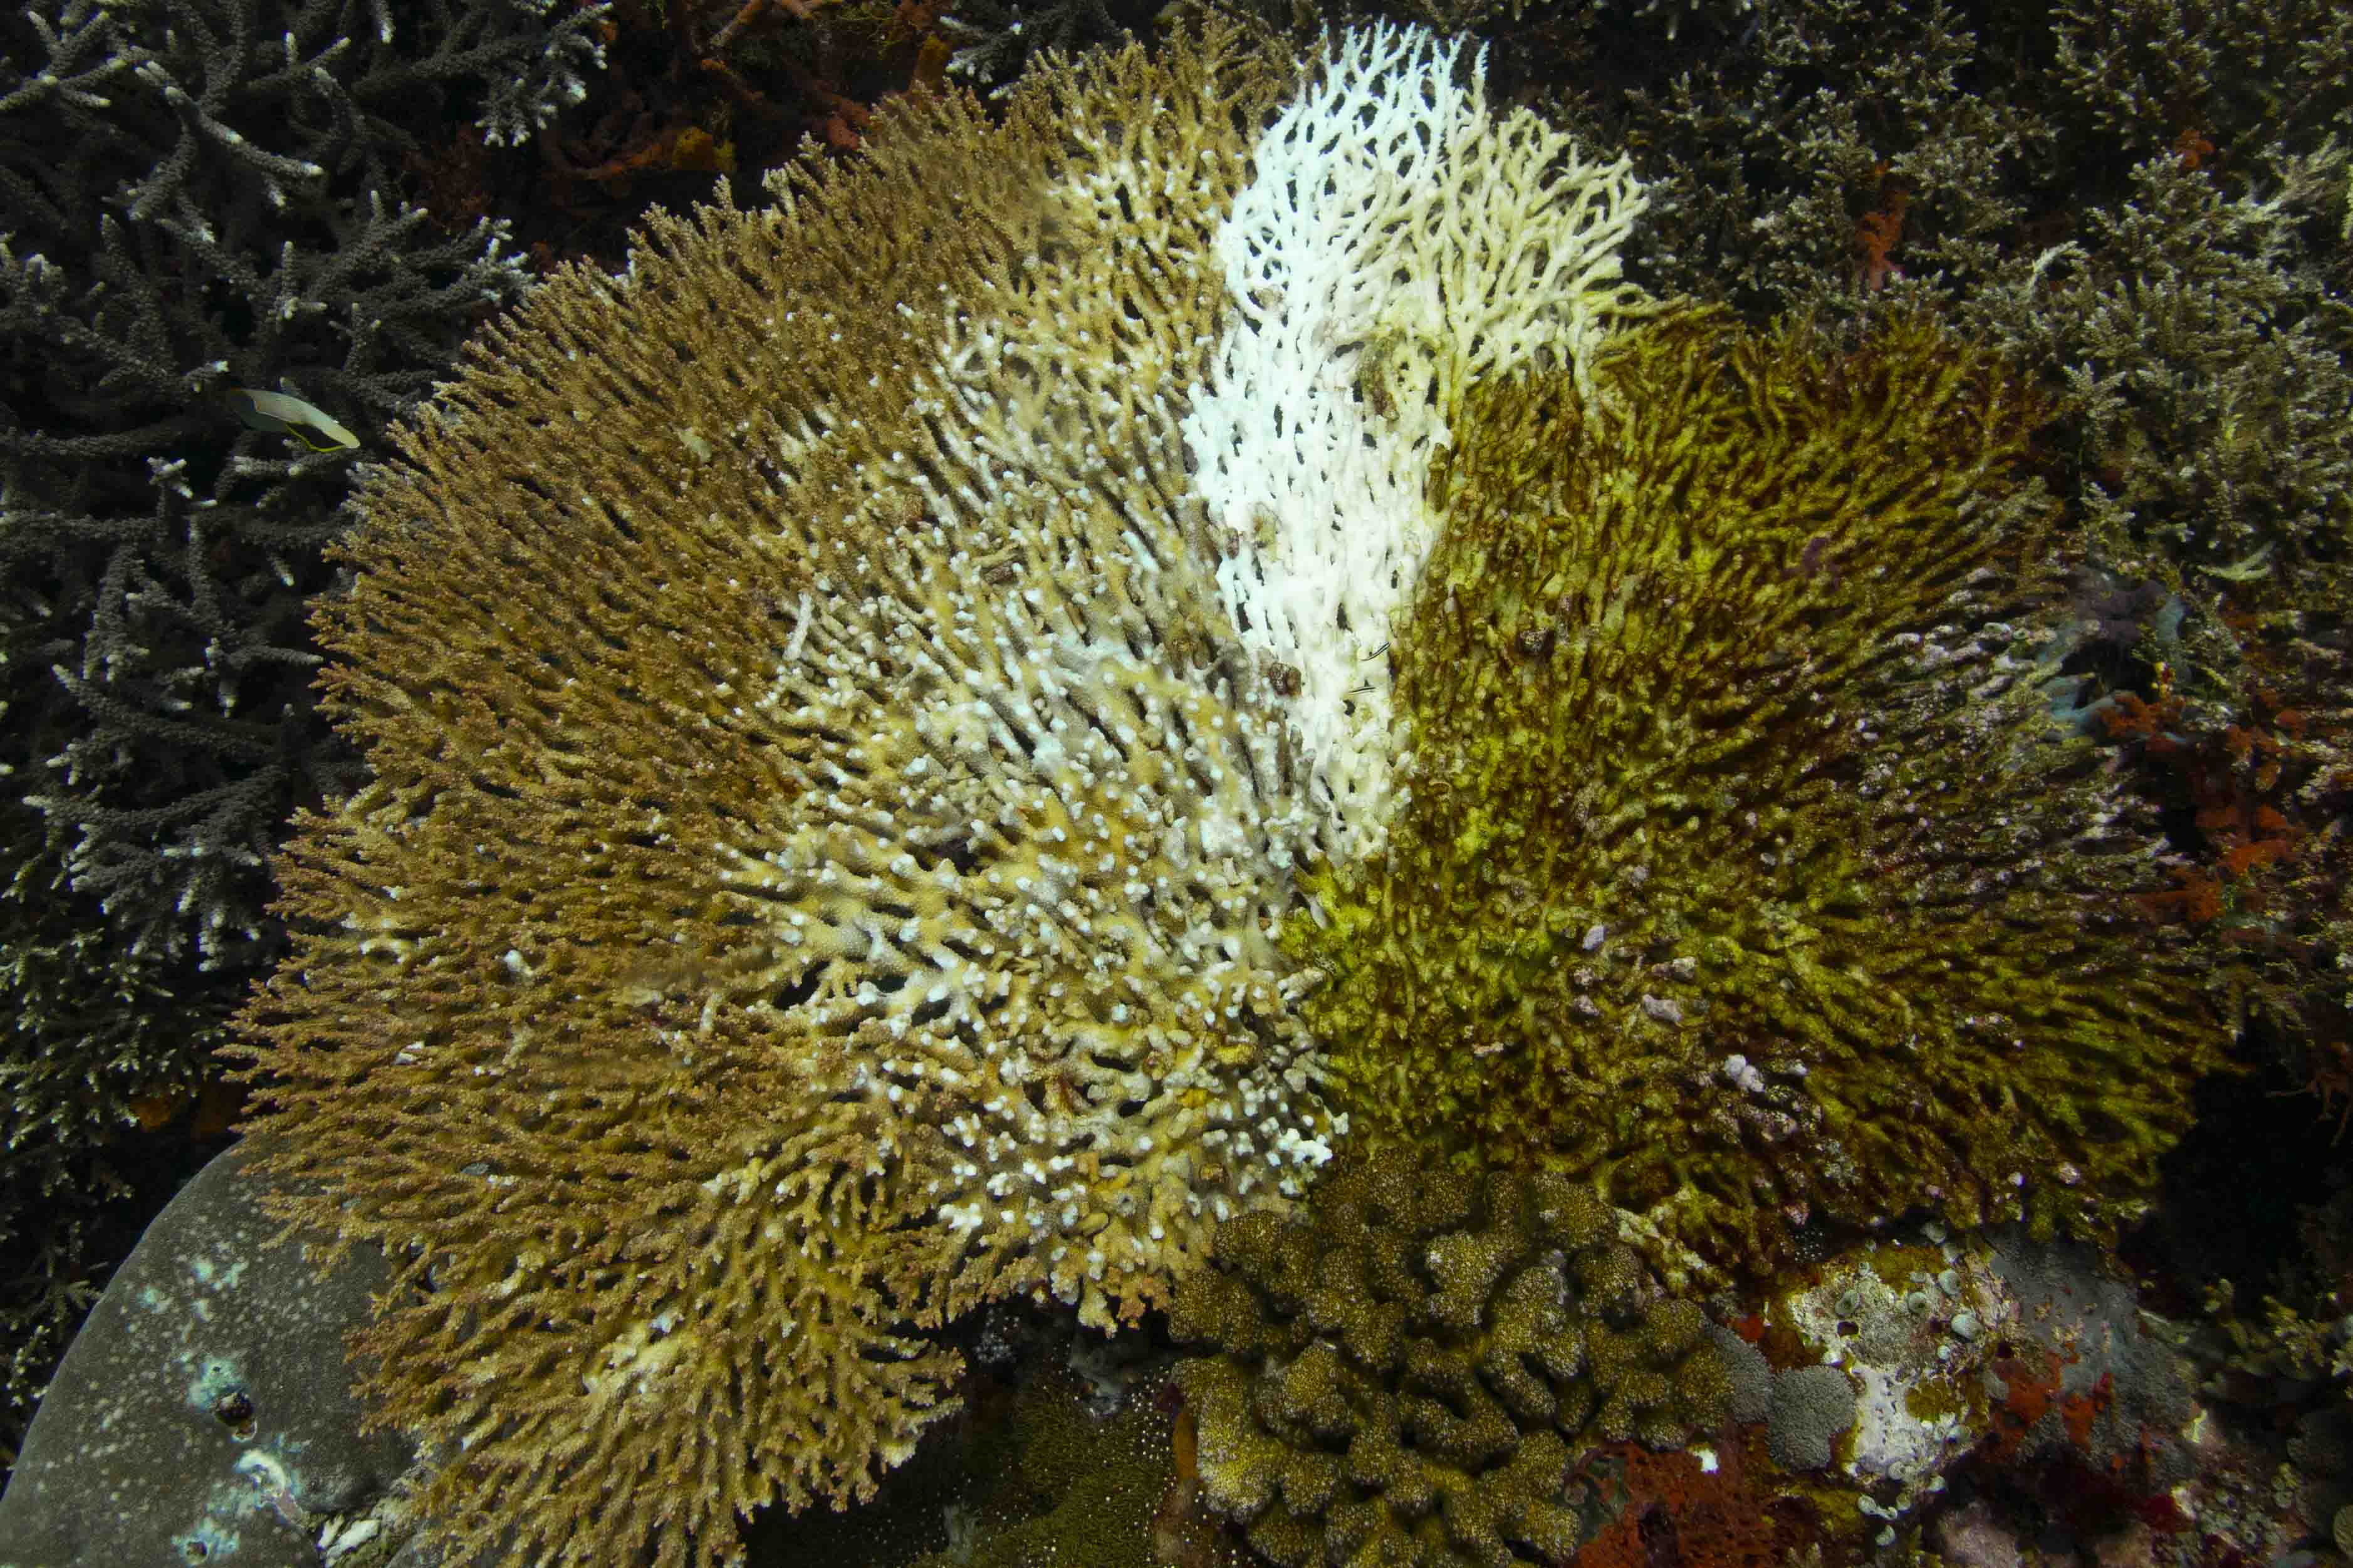 Table coral showing the various stages of bleaching.